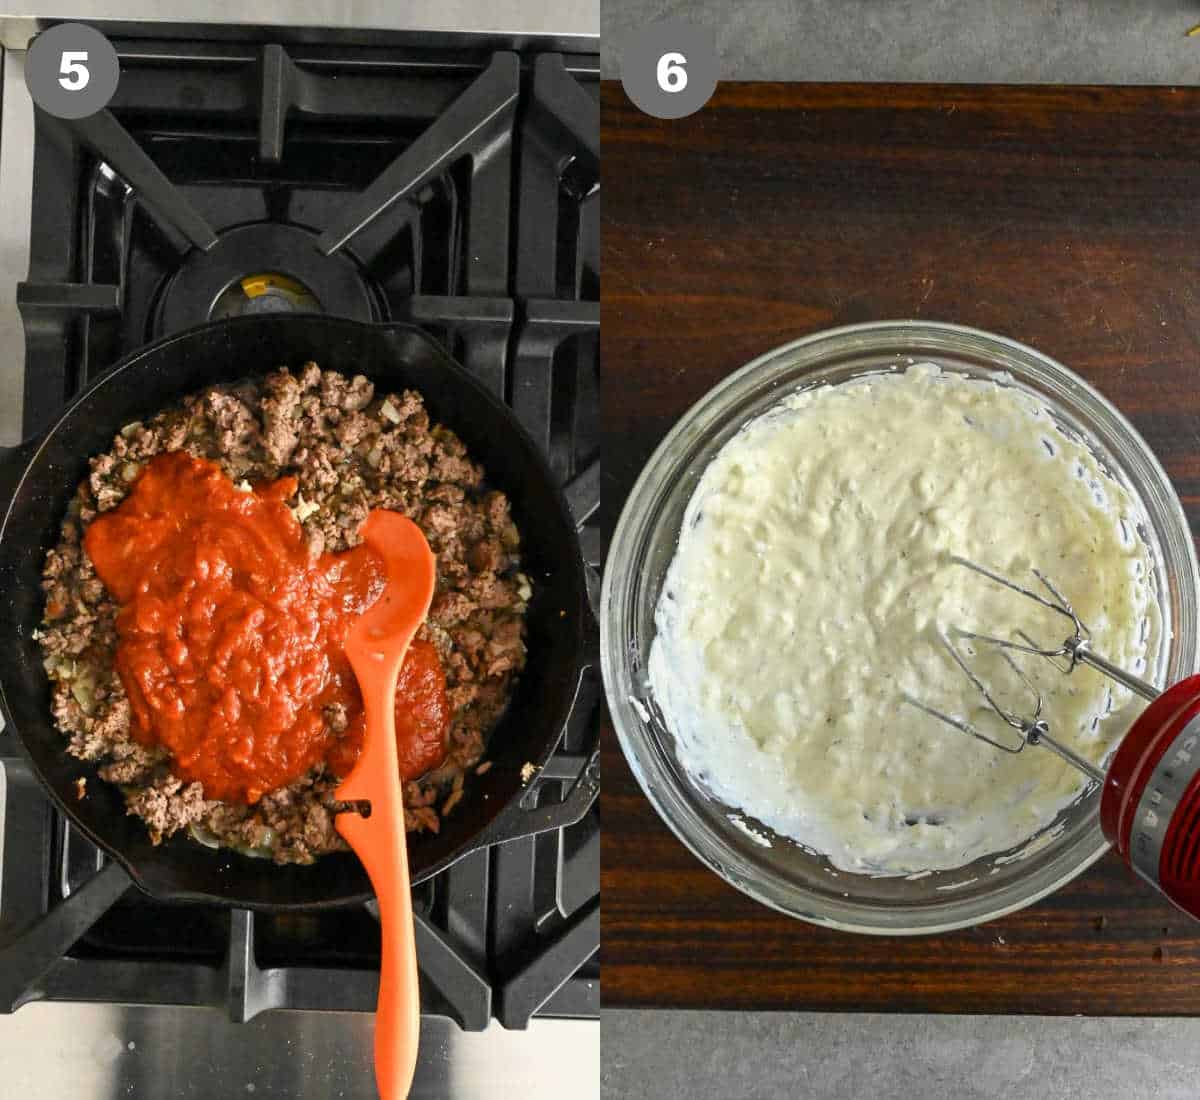 Spaghetti sauce added to the ground beef and cheese mixture blended together in a bowl.